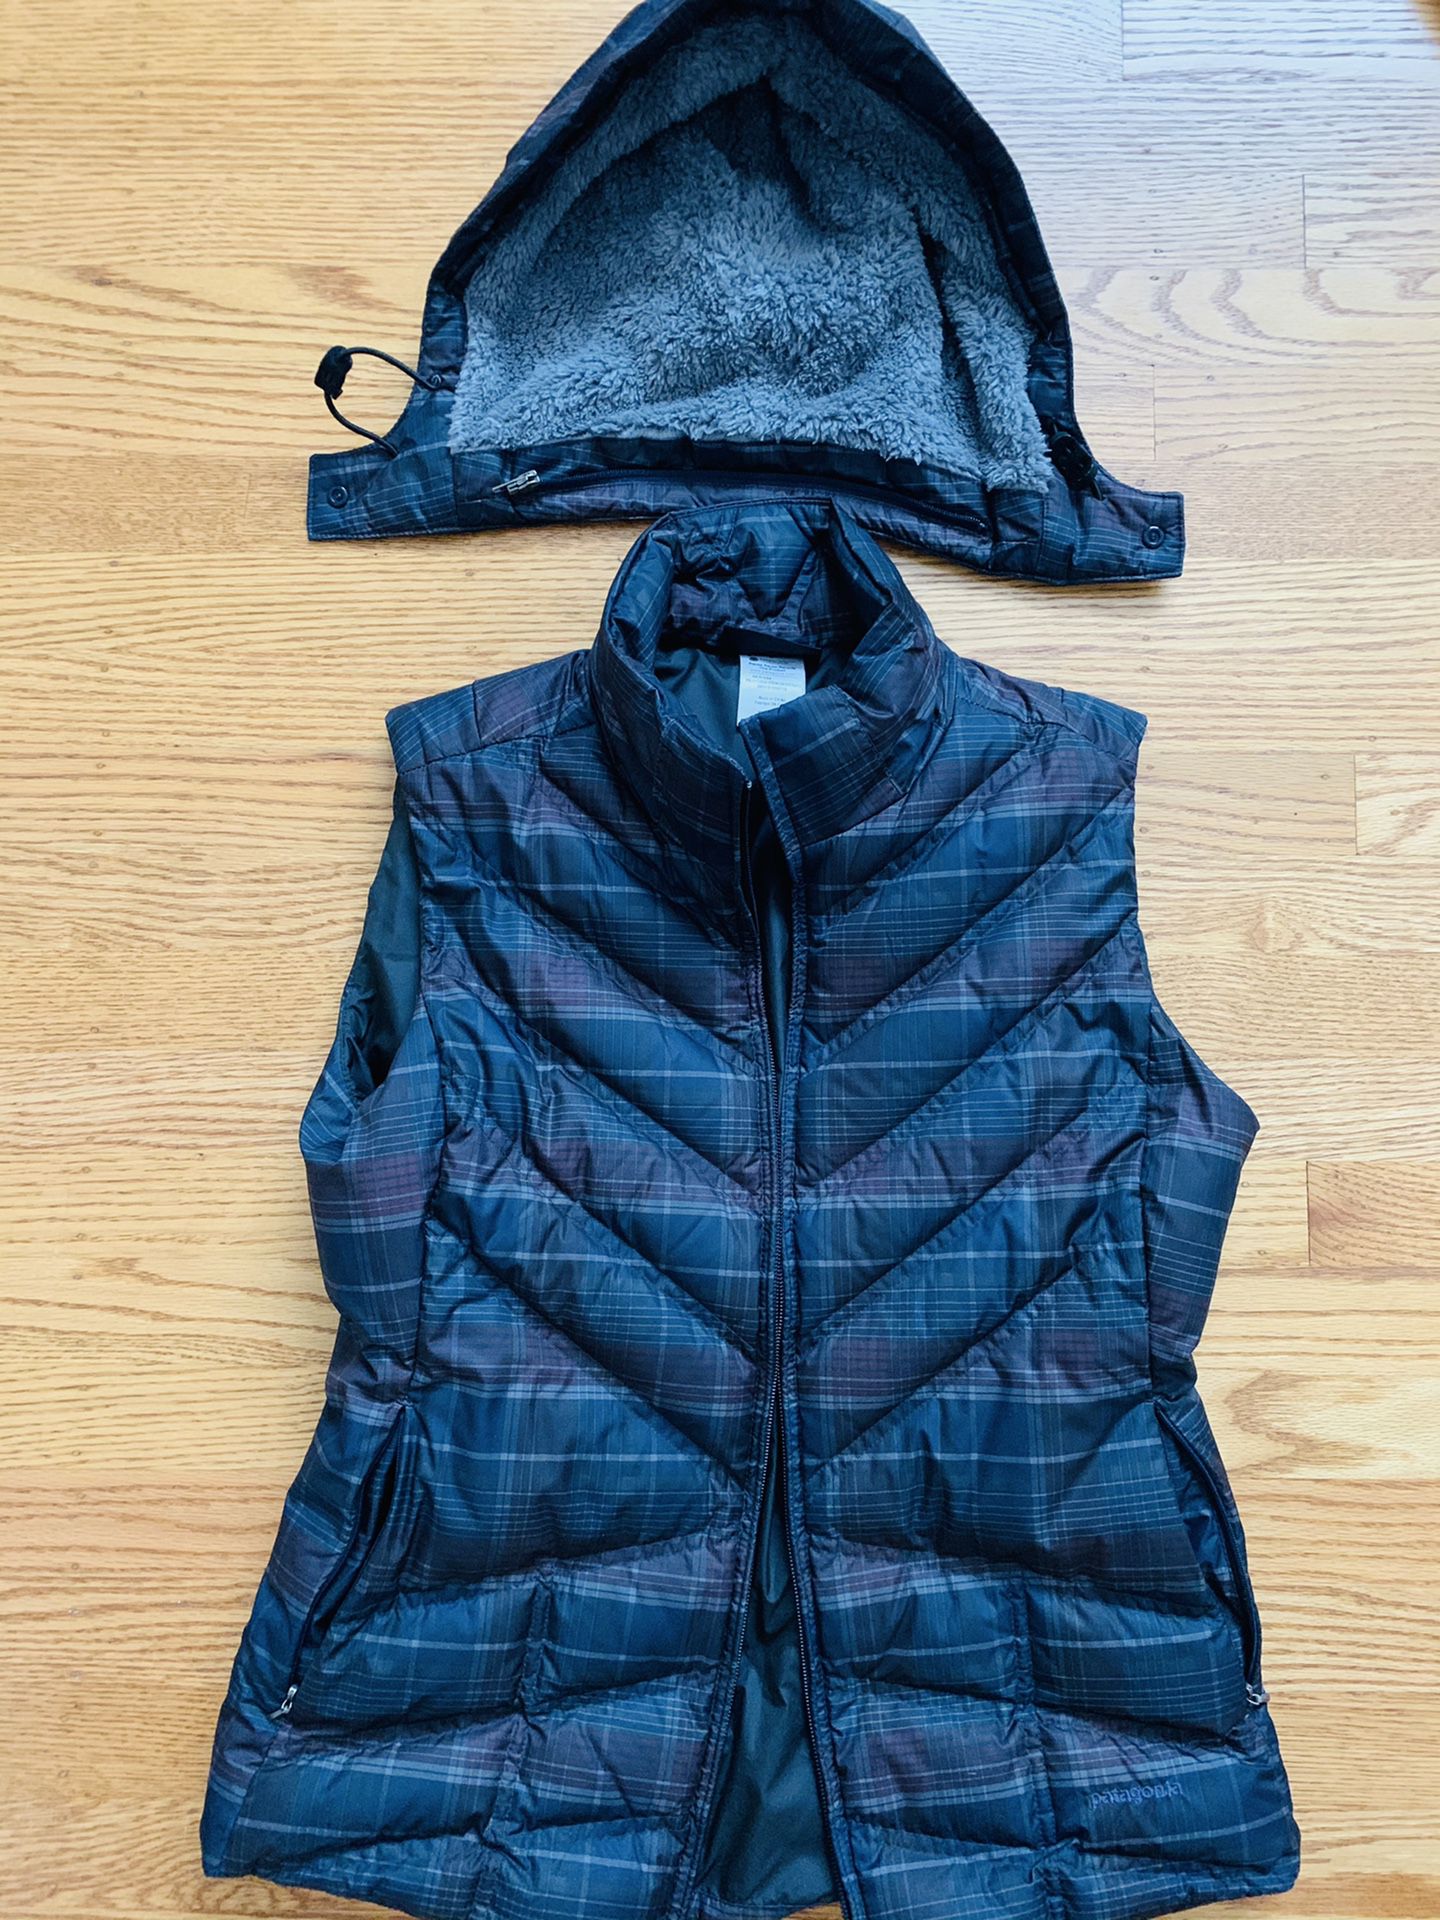 Used Women’s Medium Patagonia Down/Polyester Vest, removable hood